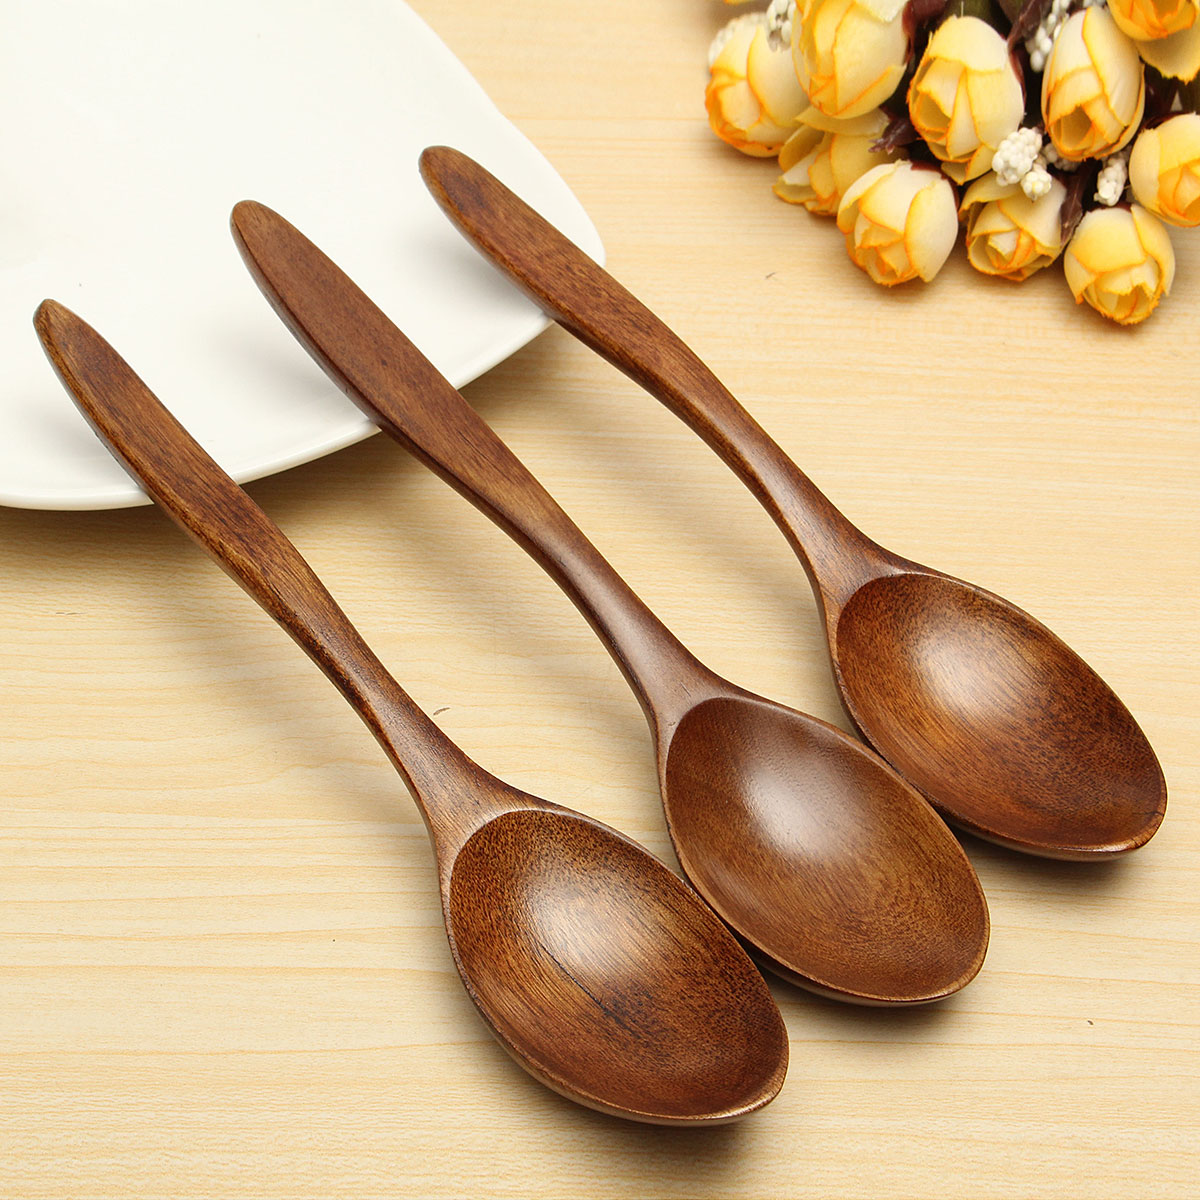 5Pcs-Wooden-Cooking-Kitchen-Utensil-Coffee-Tea-Ice-Cream-Soup-Caterin-Spoon-Tool-1067937-4